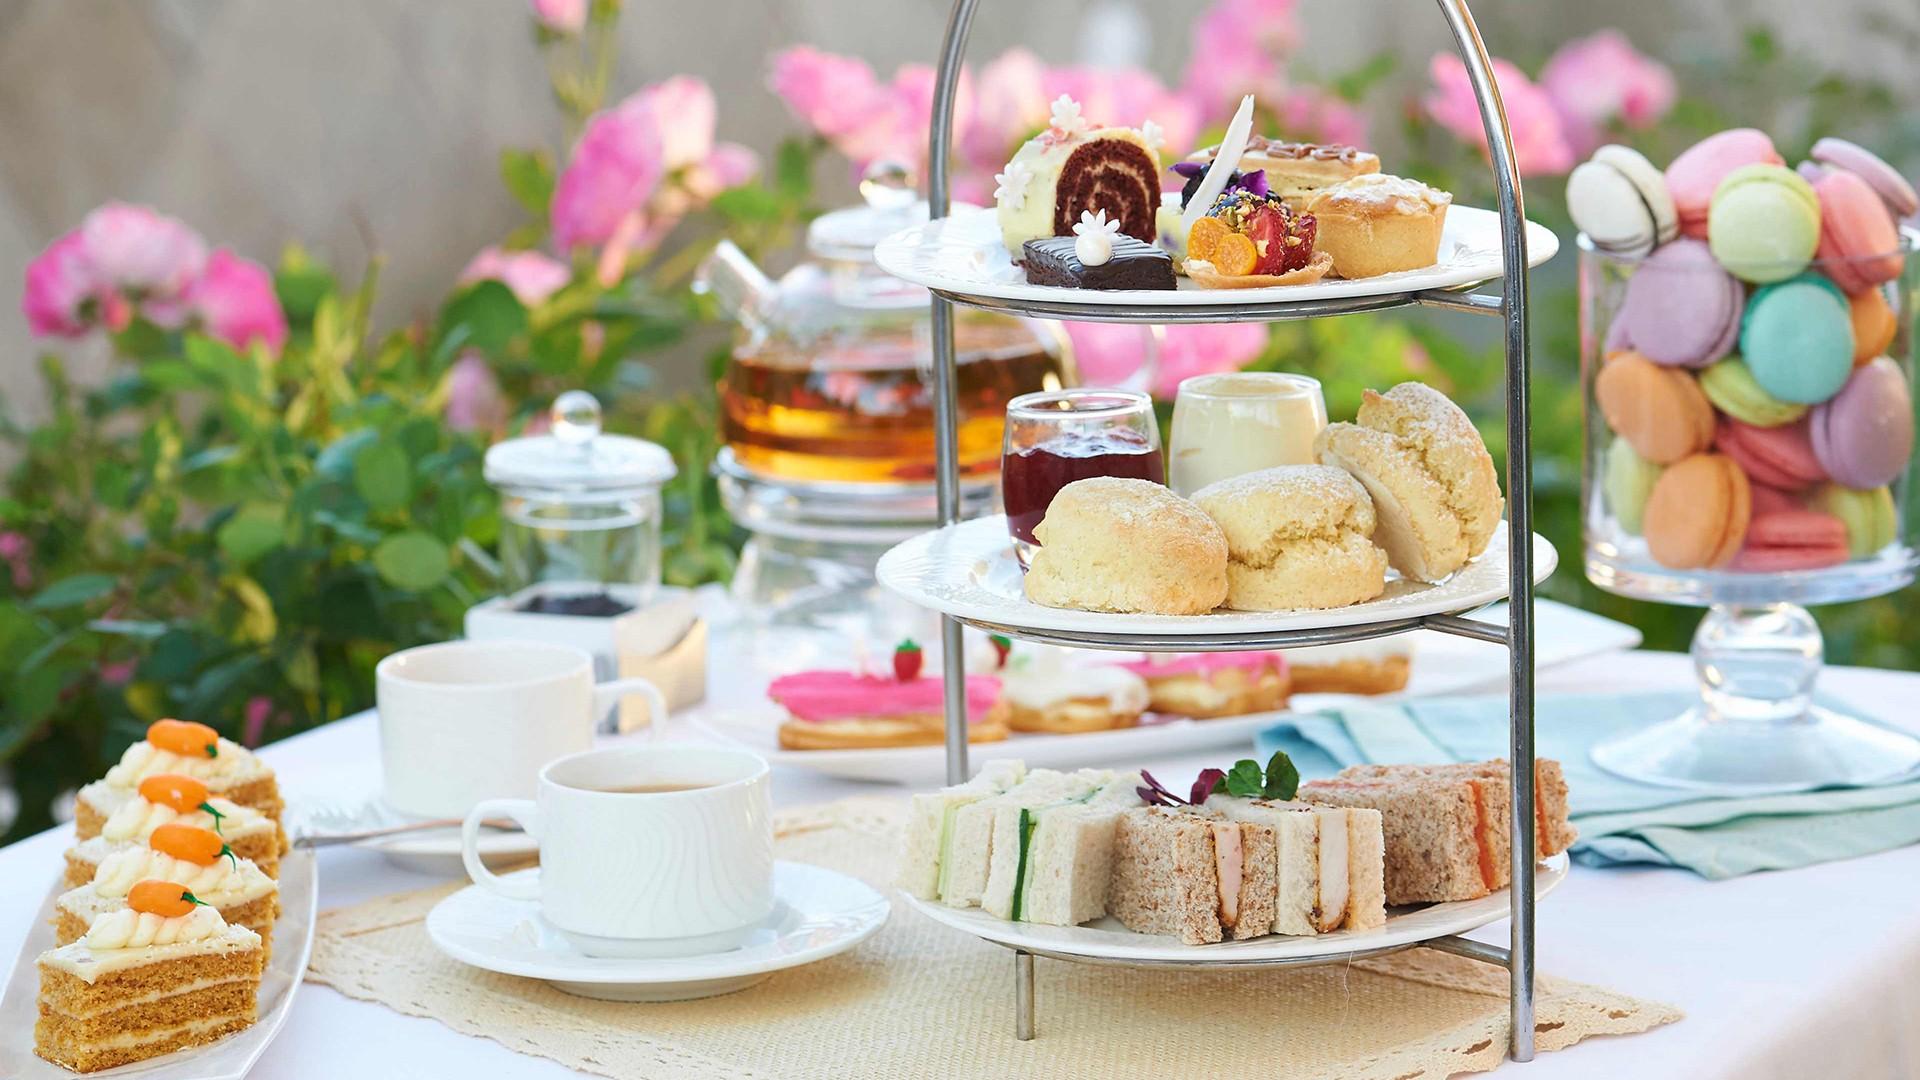 From Afternoon to High Tea: Your Guide to Hosting Tea Parties